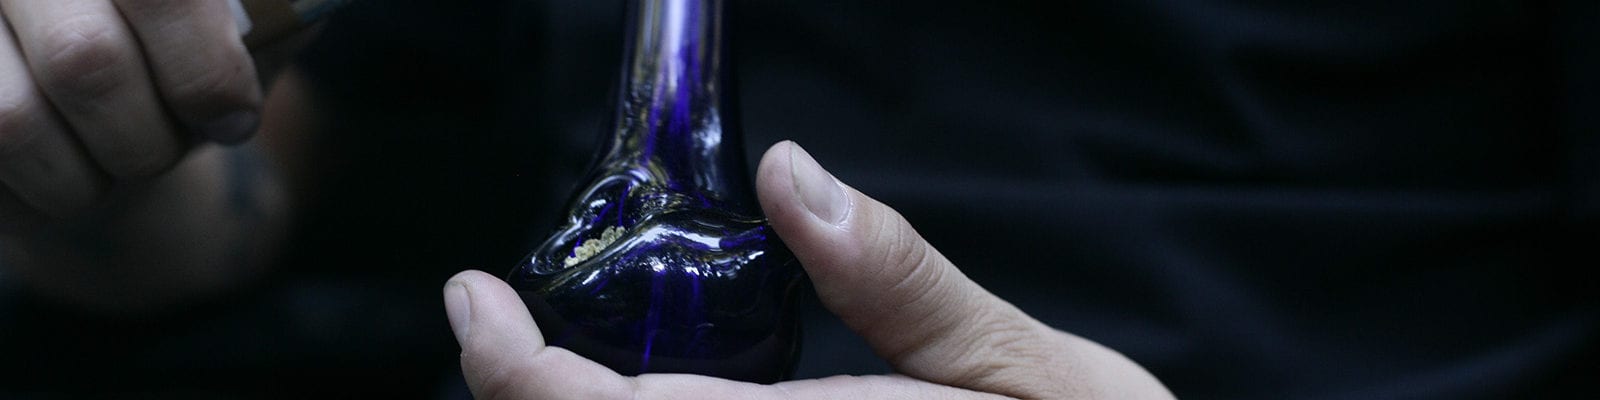 A man holds a lighter to a loaded bowl of ground cannabis.